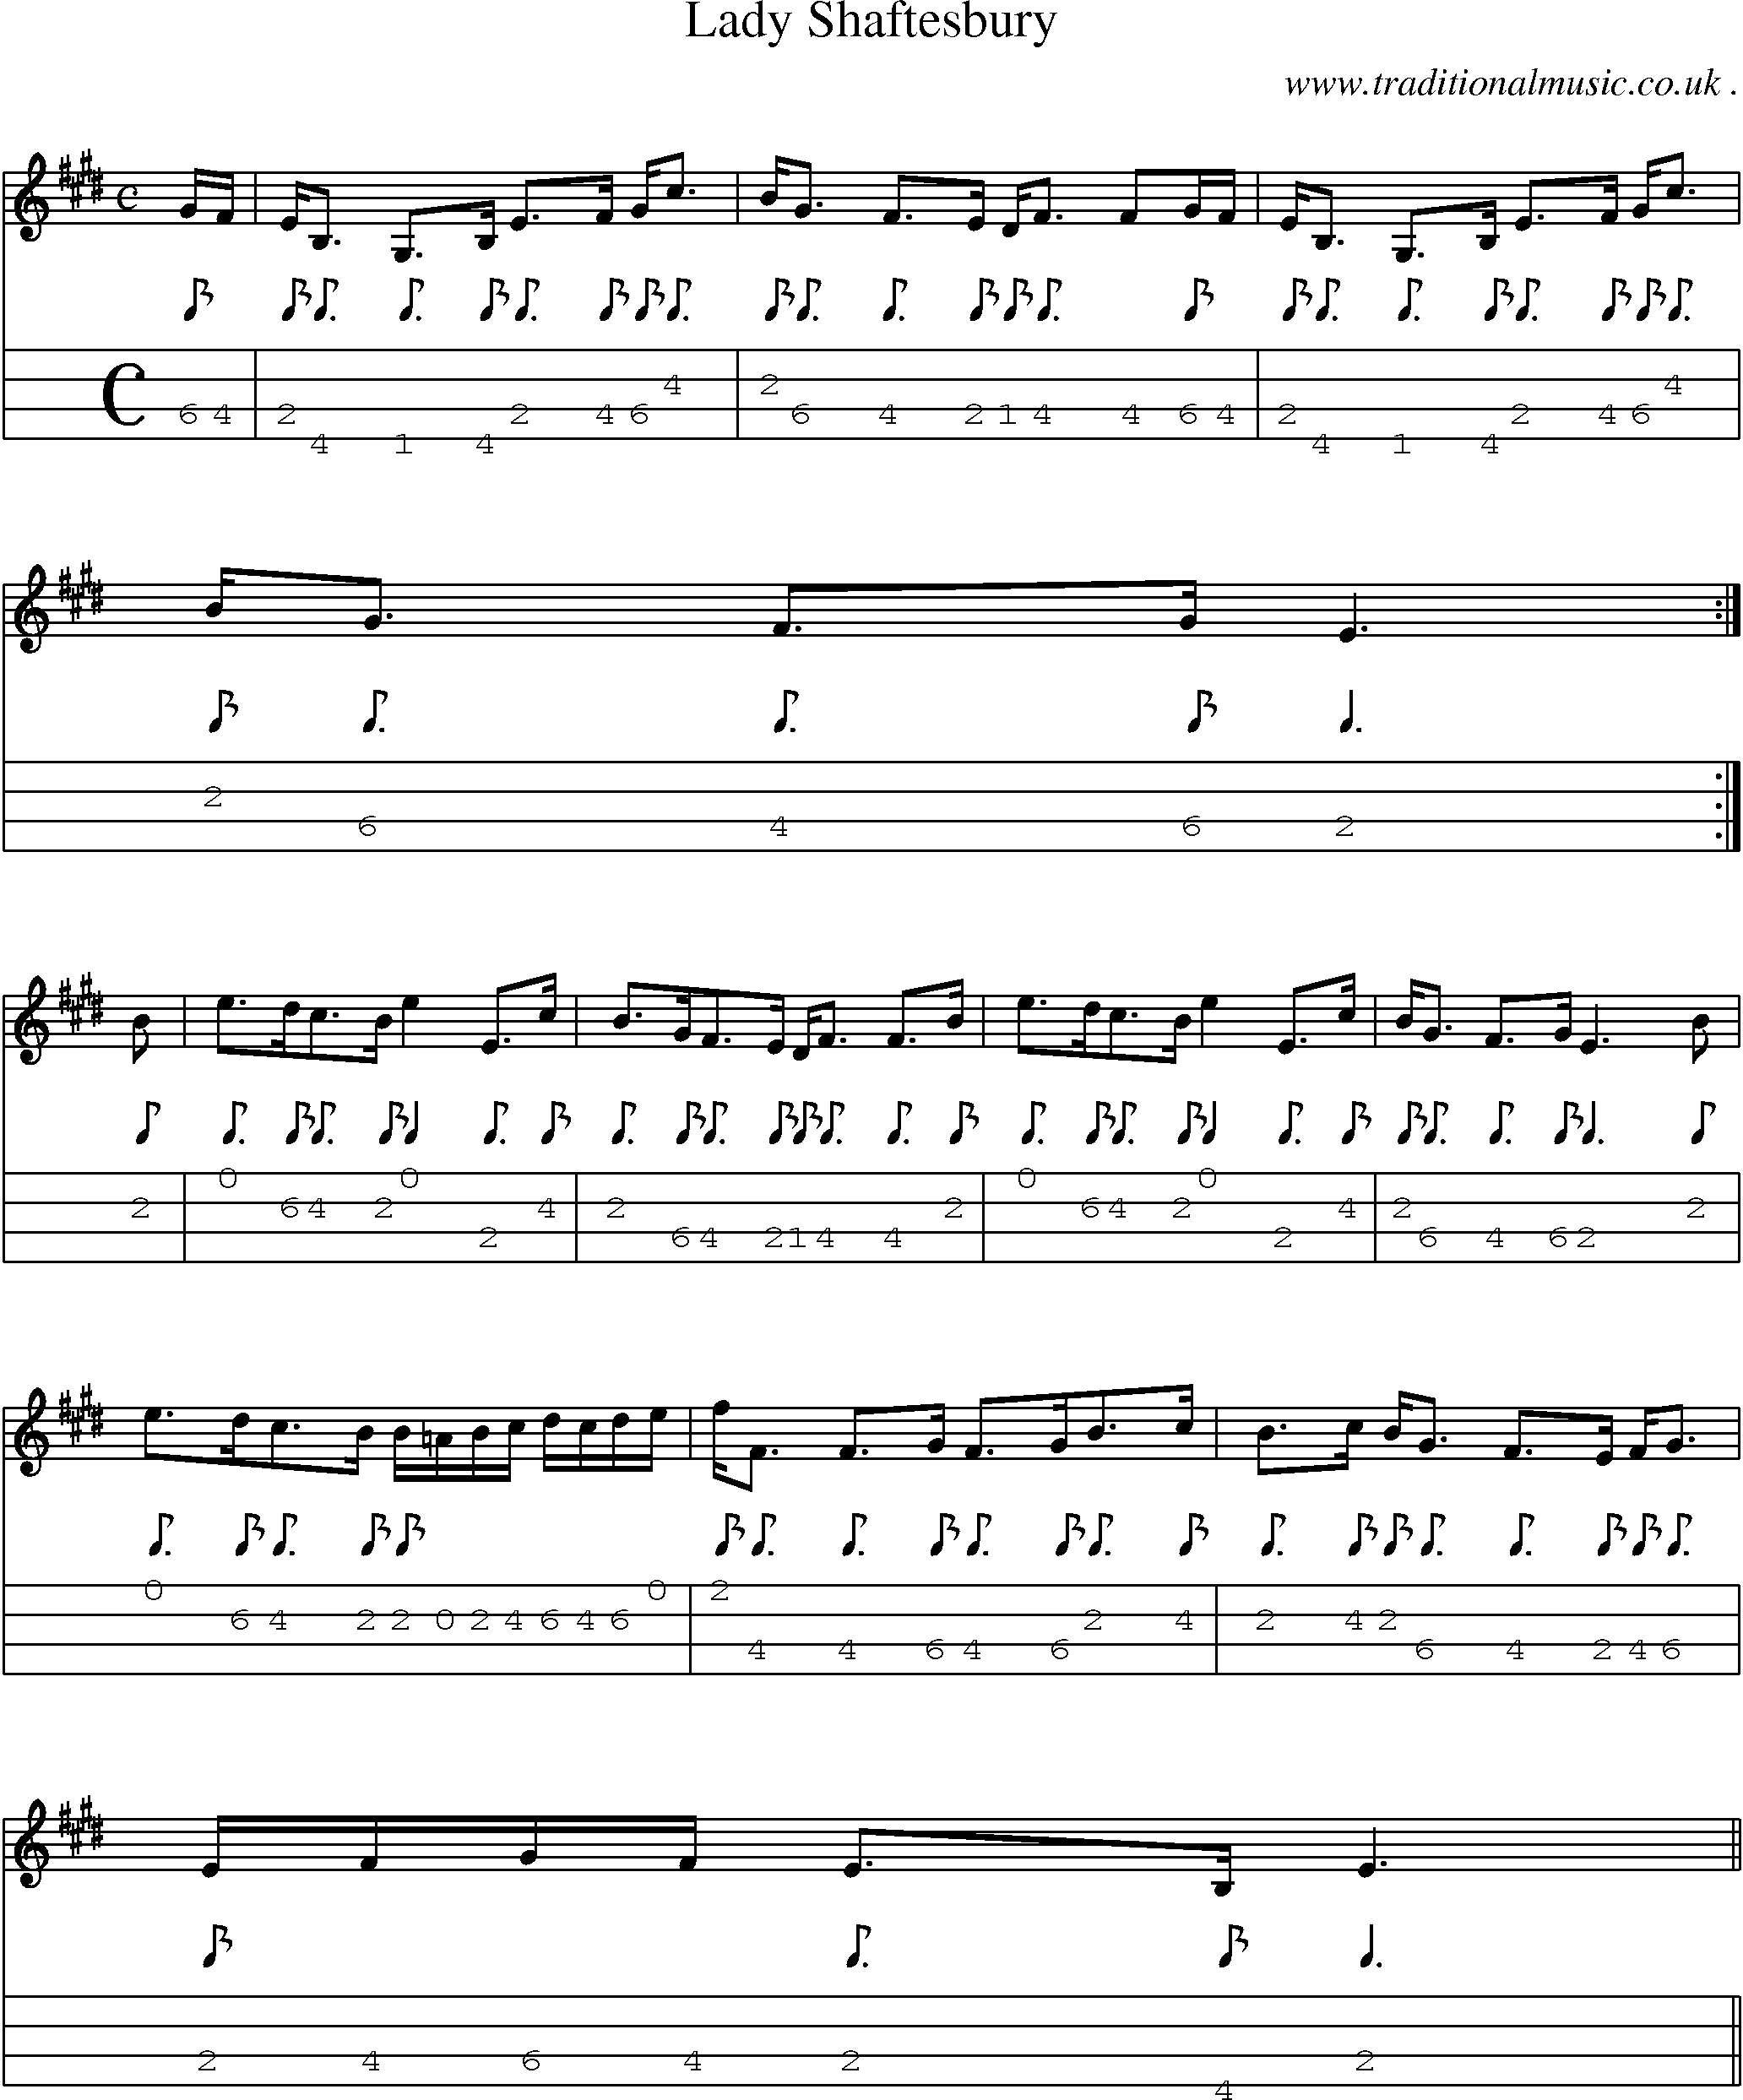 Sheet-music  score, Chords and Mandolin Tabs for Lady Shaftesbury